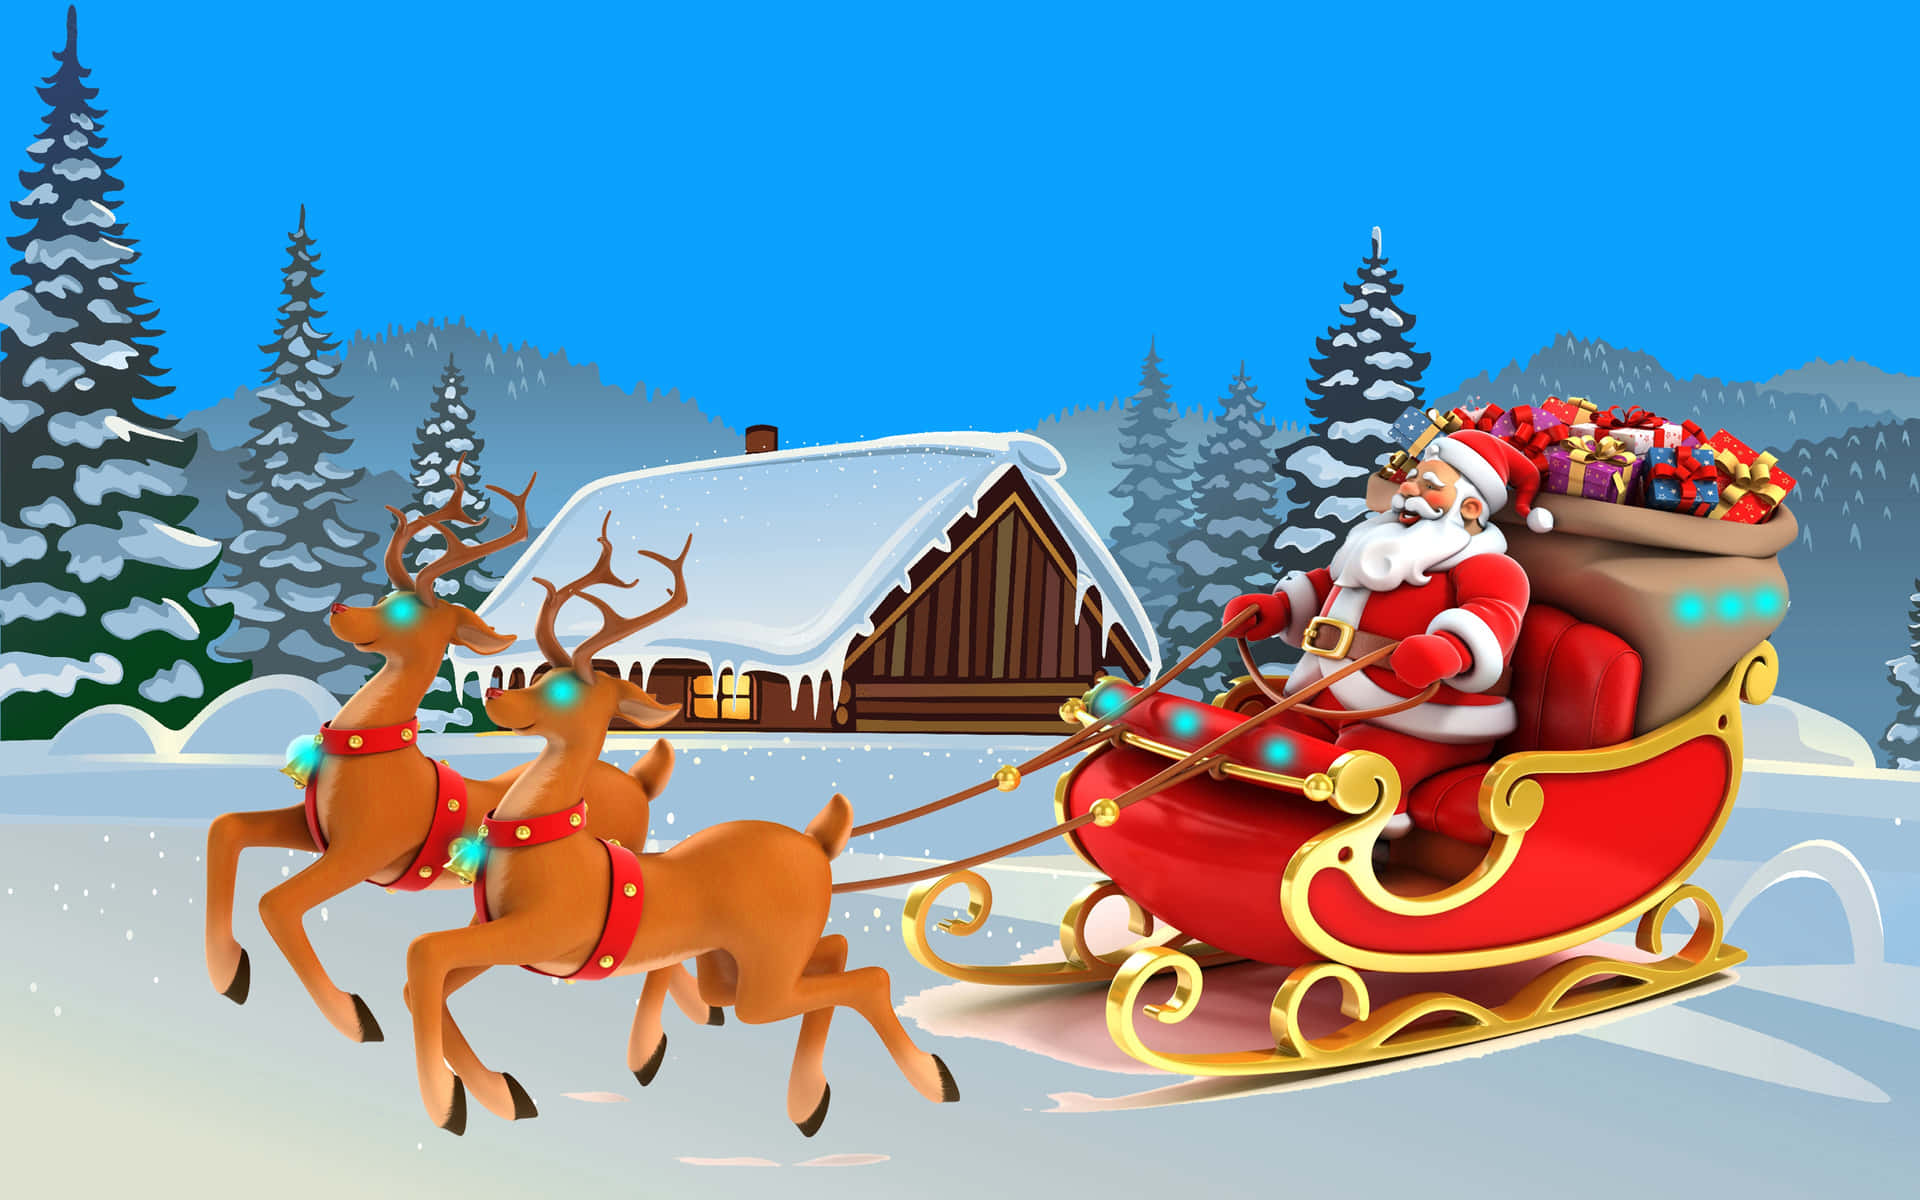 Christmas is a time for celebration and fun, find it on your PC! Wallpaper